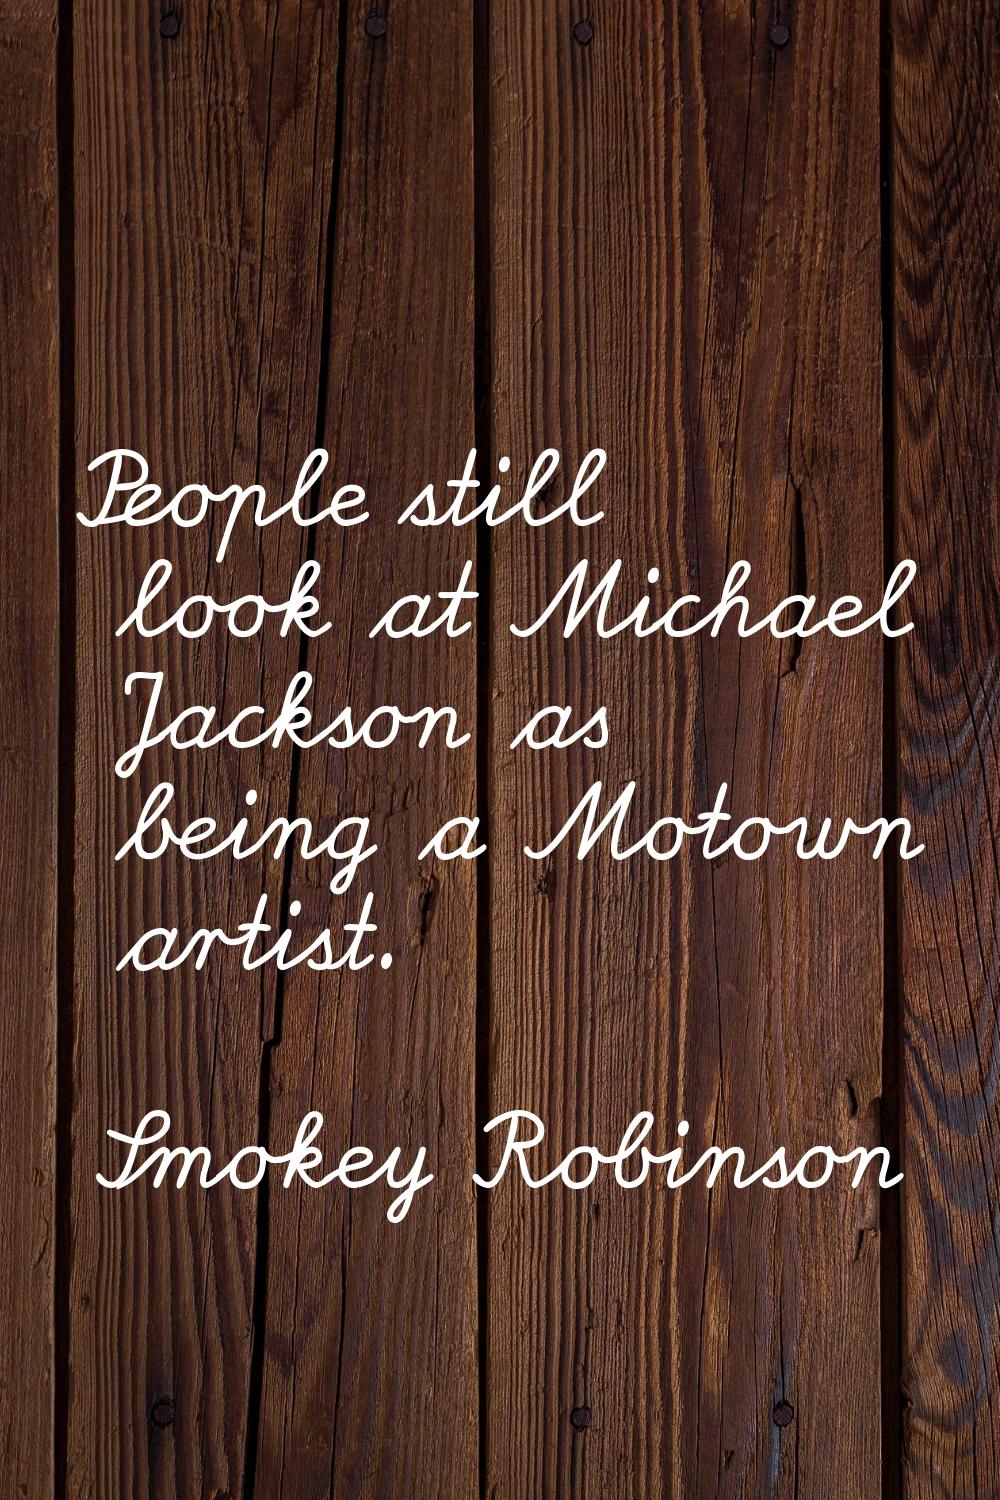 People still look at Michael Jackson as being a Motown artist.